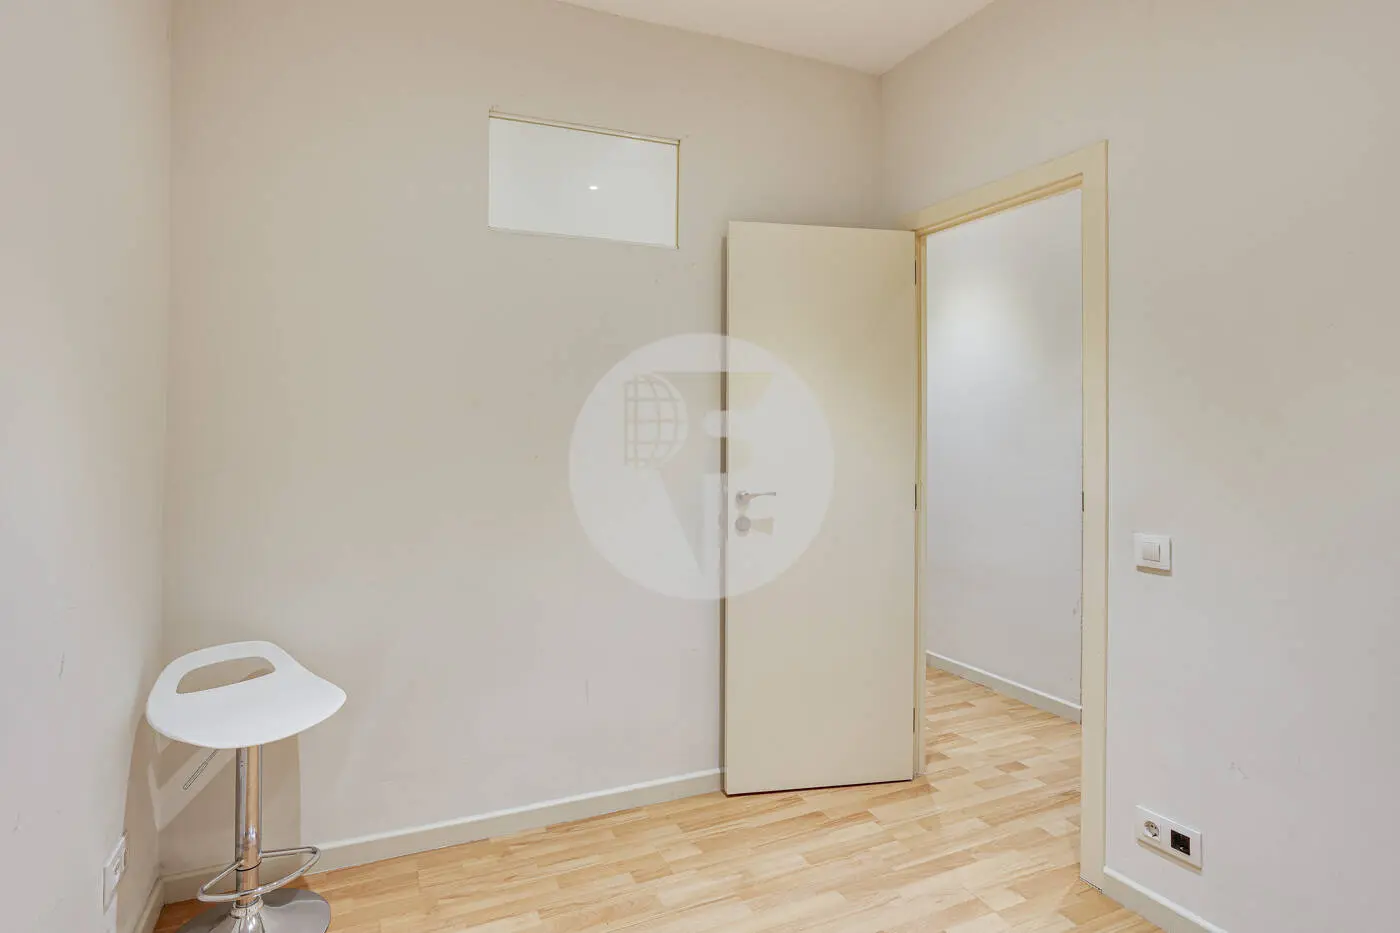 Magnificent apartment for sale next to Pl Universitat of 114m2 according to the land registry, located on Tallers Street in the Ciutat Vella neighborhood of Barcelona 16